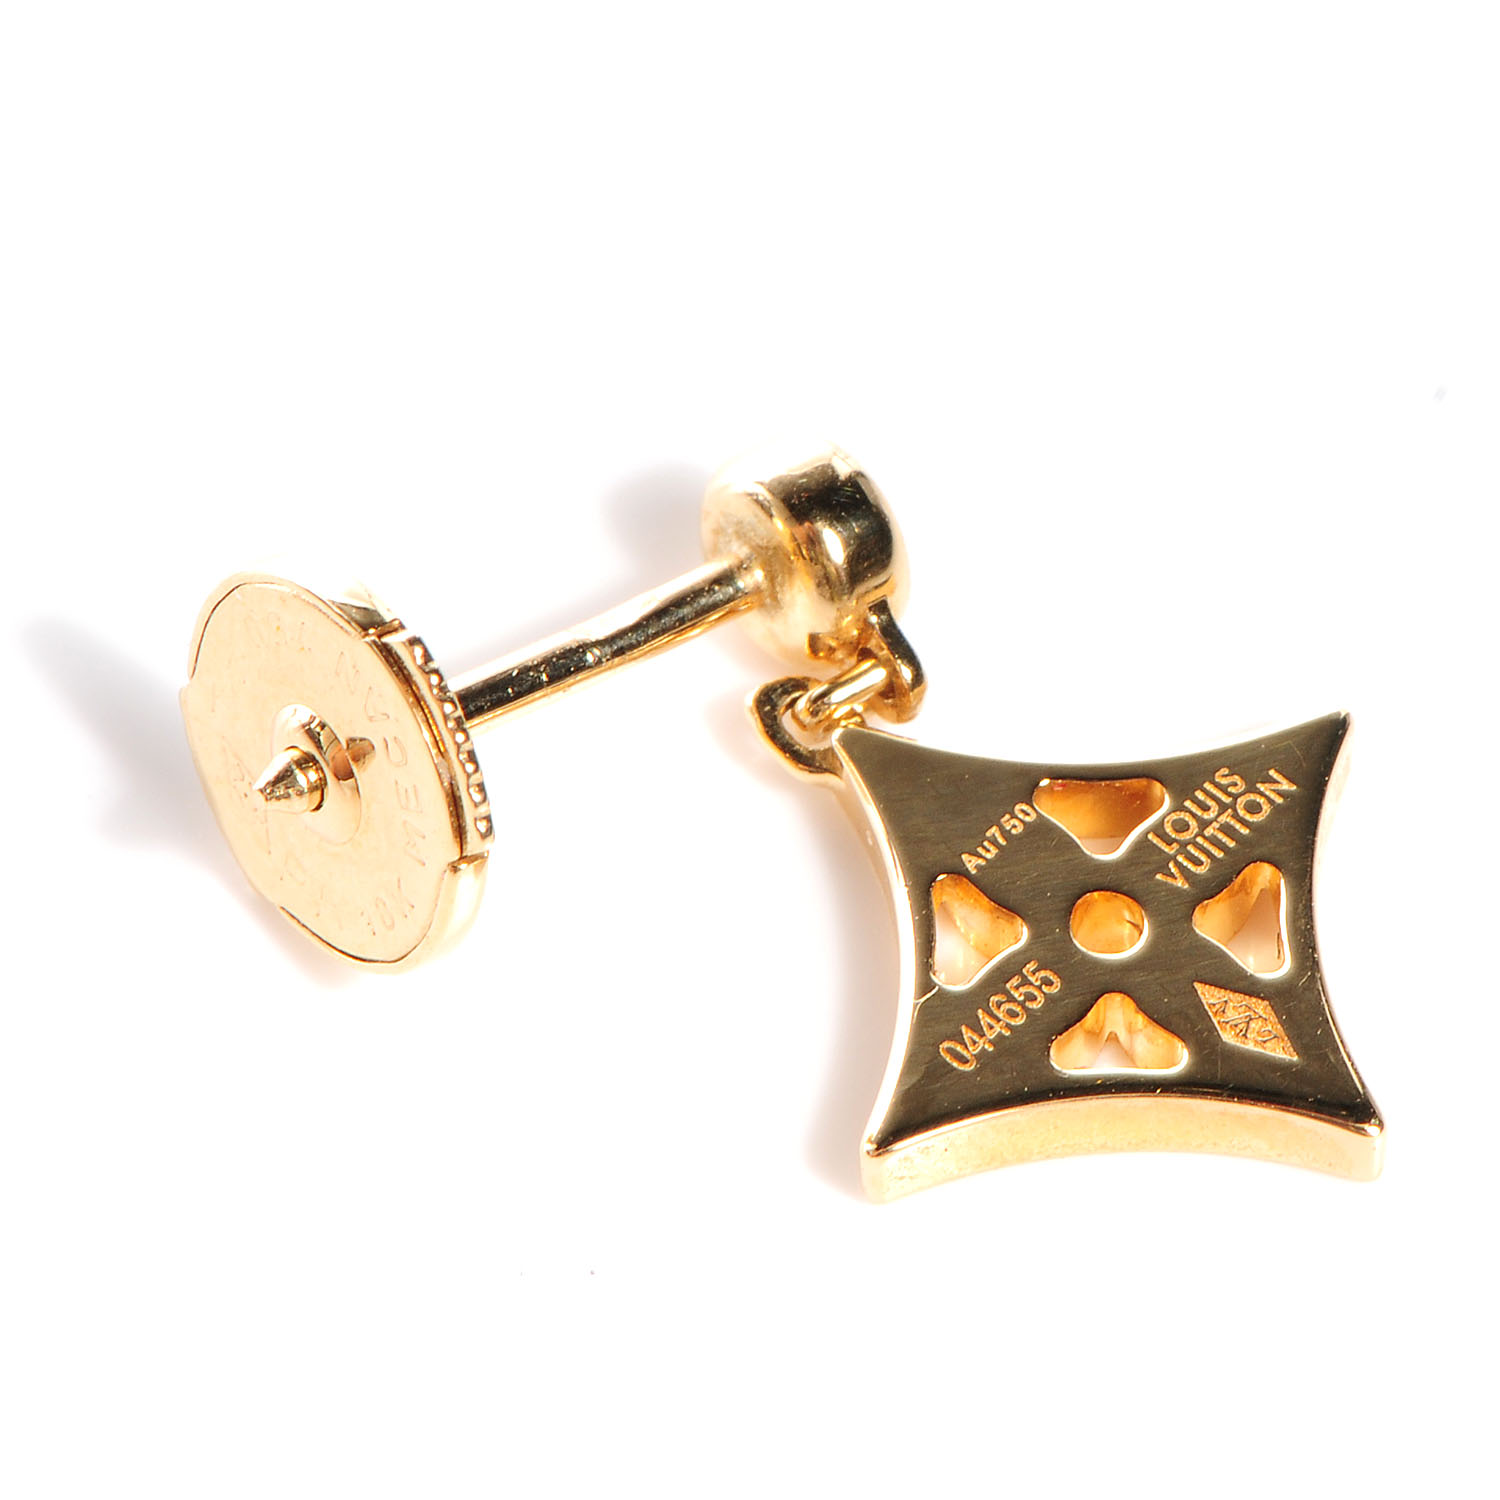 Sold at Auction: Louis Vuitton Idylle Blossom Ear Stud Earrings 18K Rose  Gold with Diamond